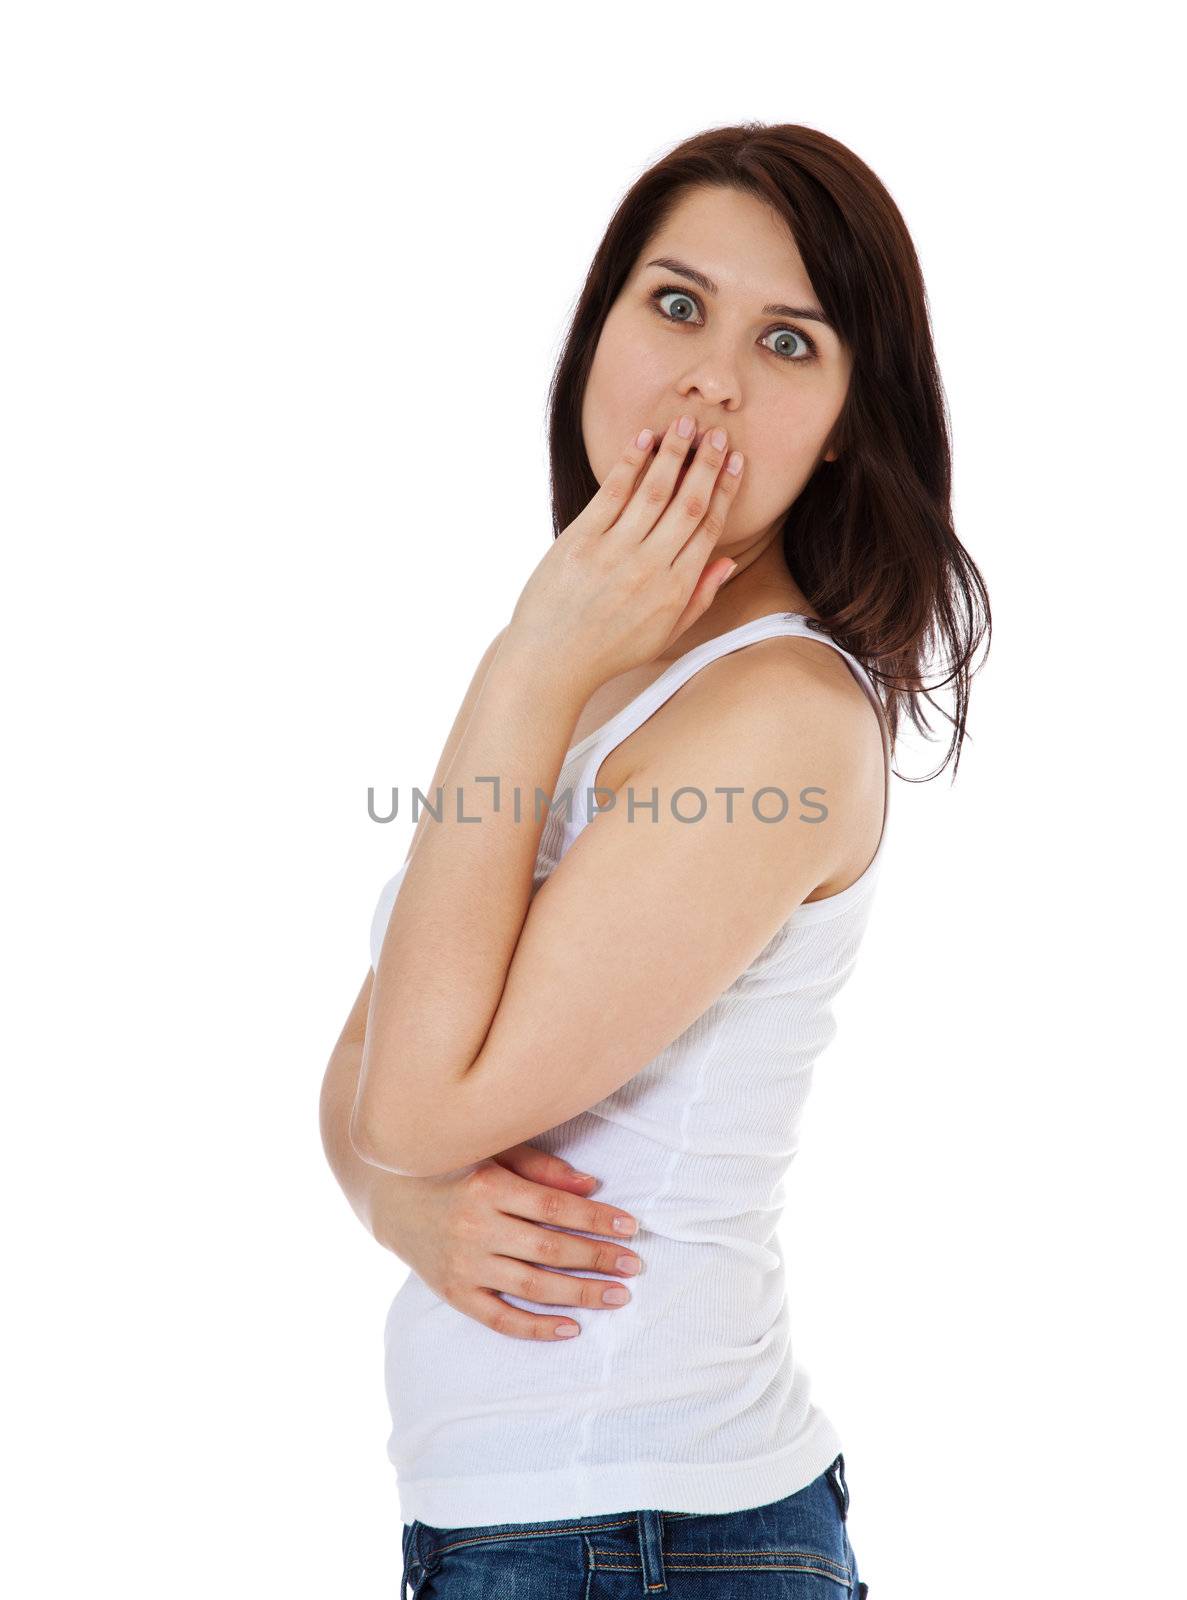 Attractive young woman with surprised facial expression. All on white background.